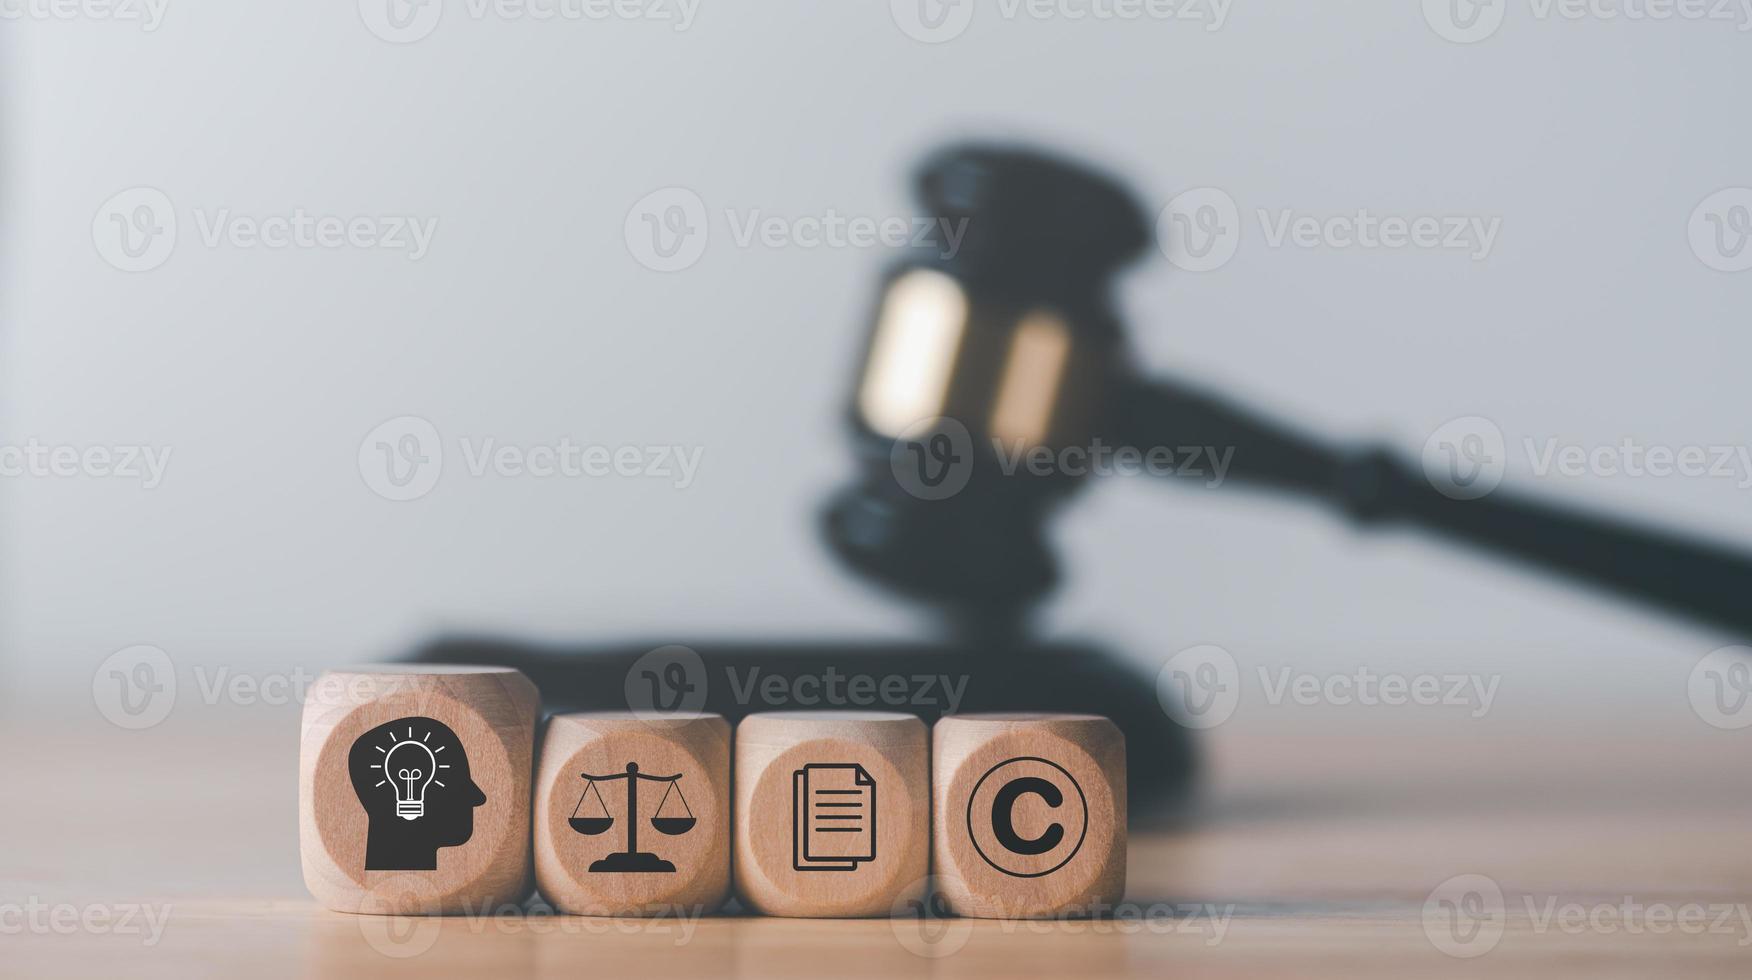 wooden blocks and Wooden judge gavel on the table, concept of copyright or intellectual property patent protection of copyright infringement proprietary declaration Legitimate innovations photo